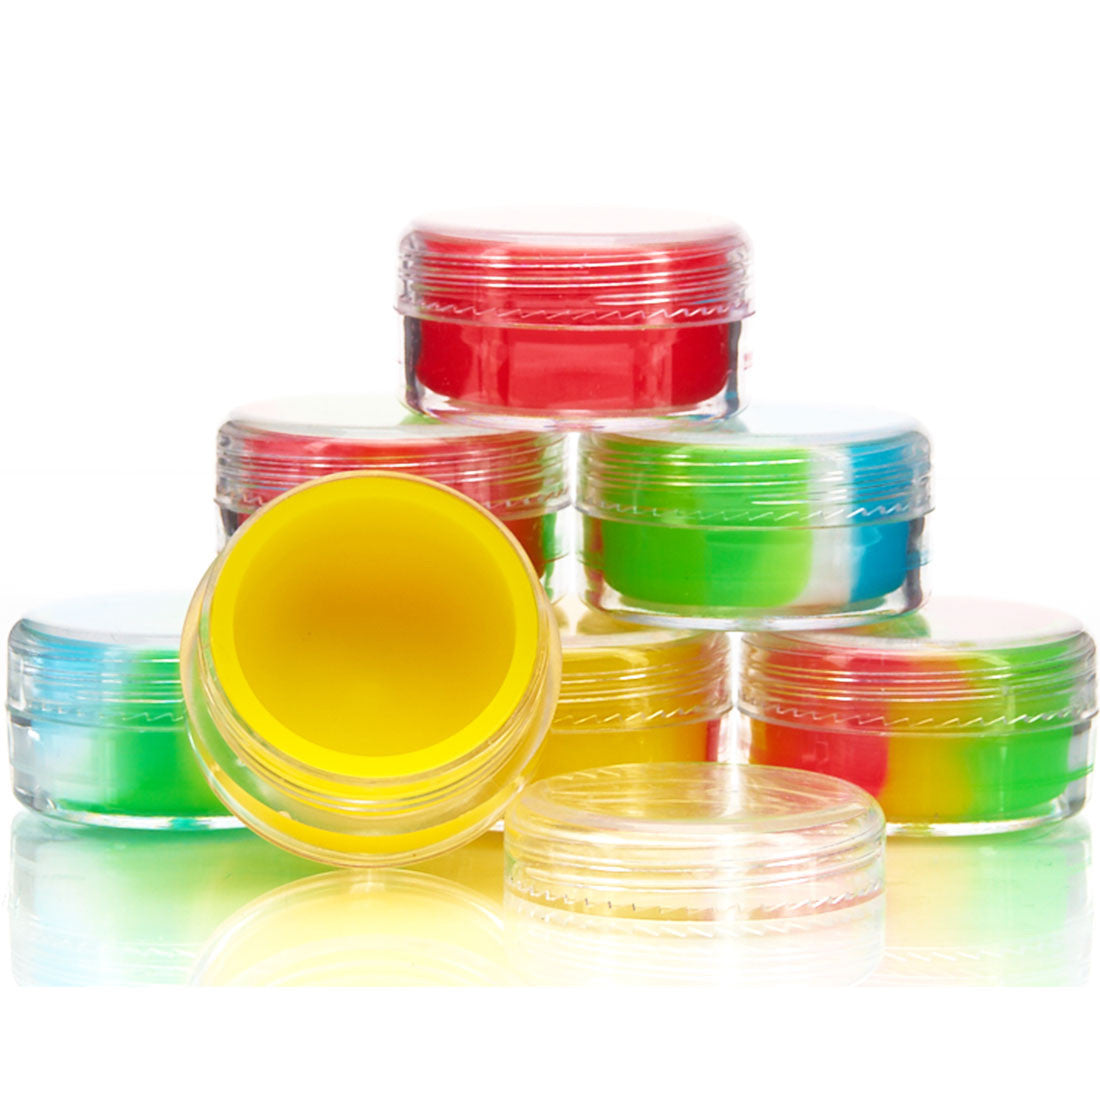 Paradise Silicone 7mm Concentrate Jar with Twist on Top and Multi-Color Options